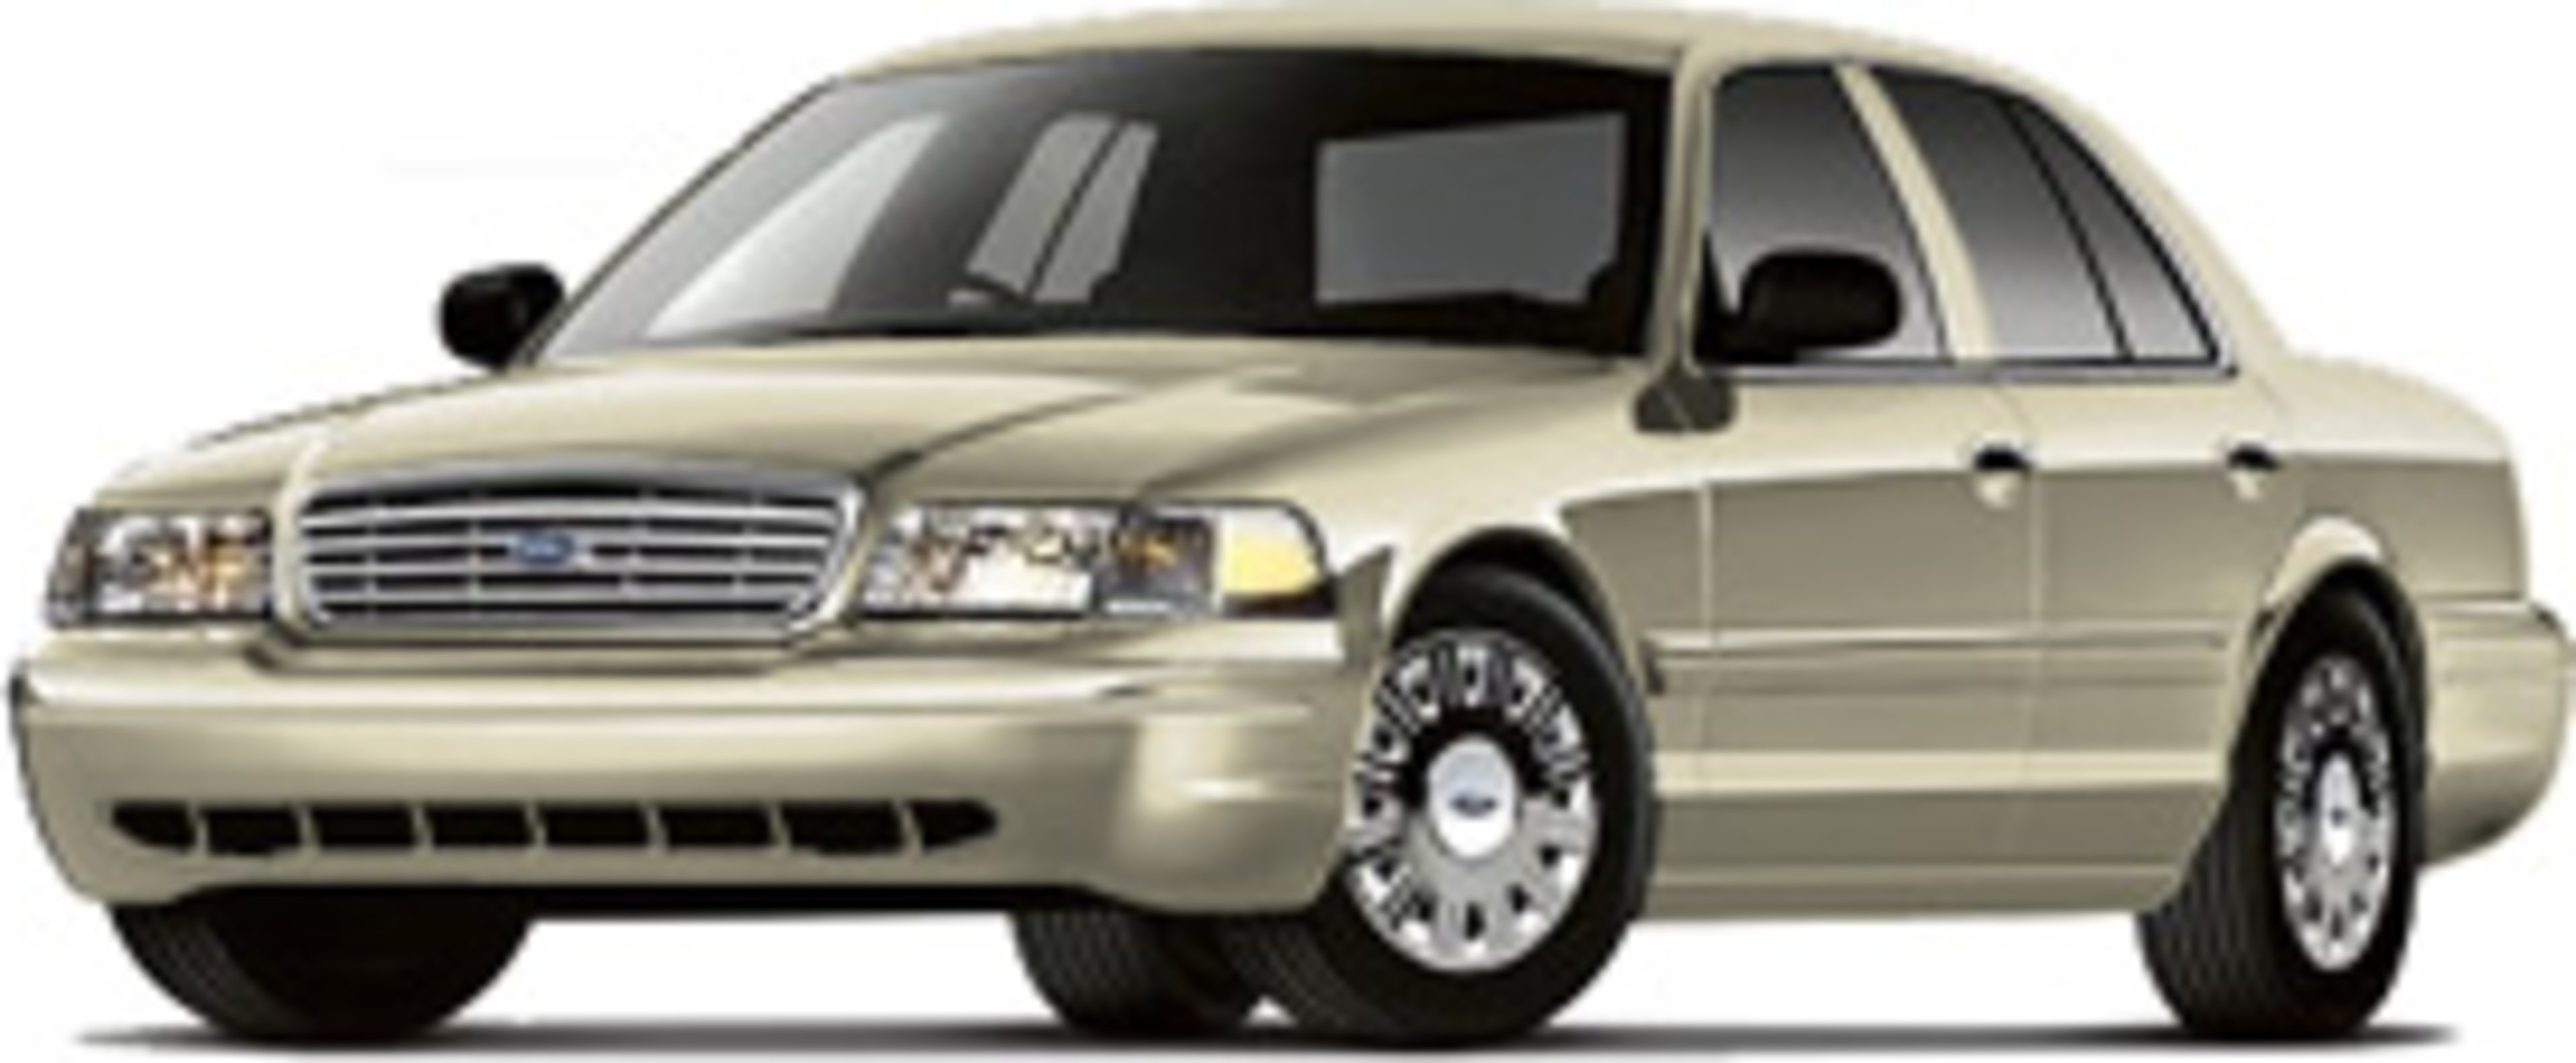 2007 Ford Crown Victoria Service and Repair Manual